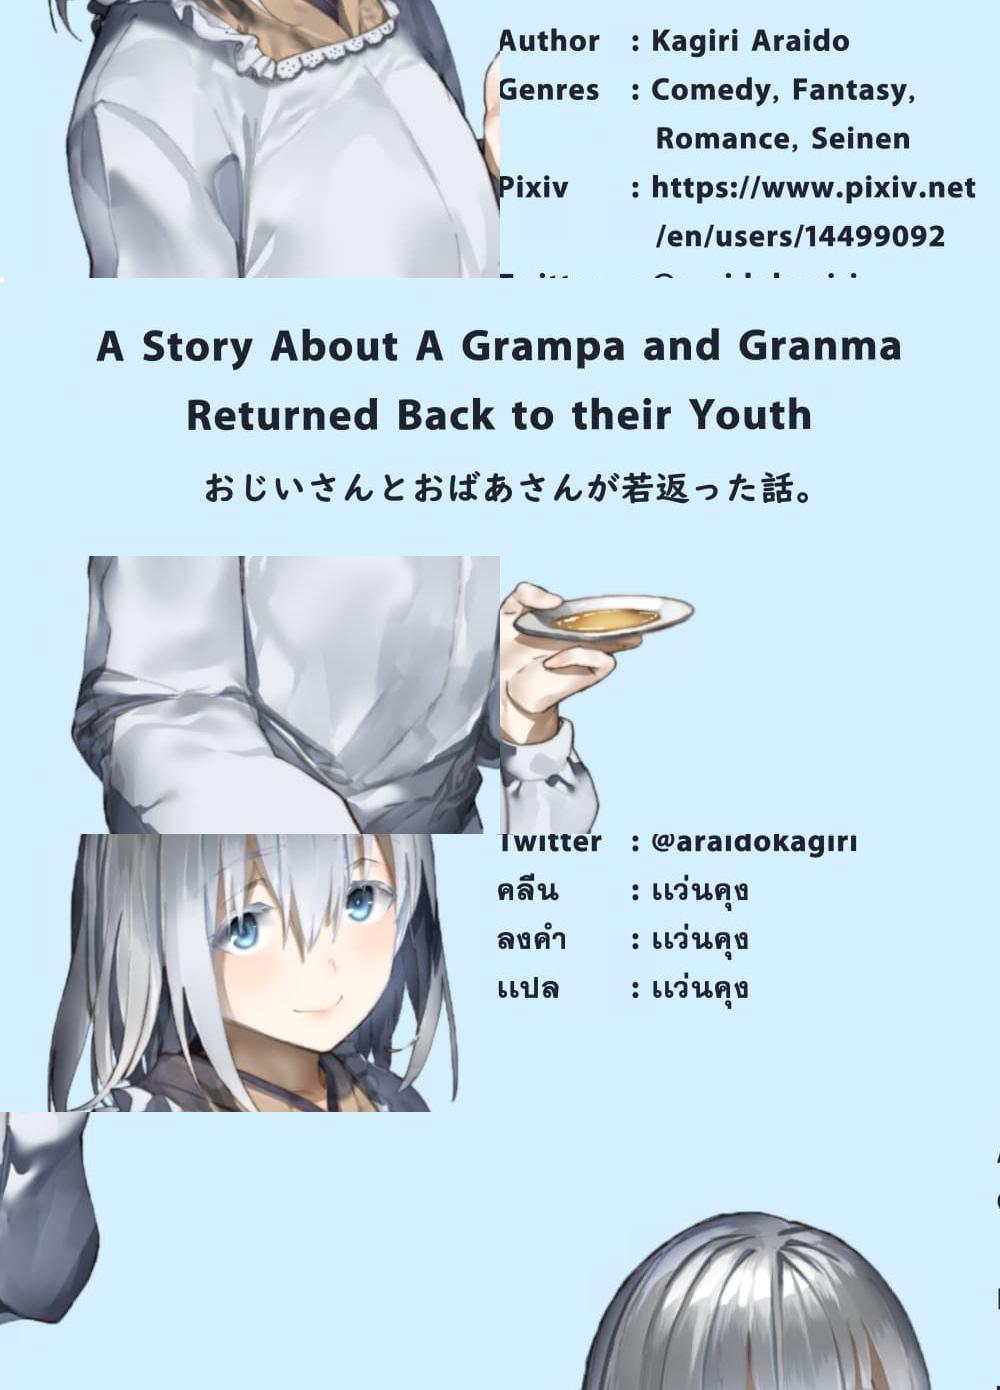 A Story About A Grampa and Granma Returned Back to their Youth - 33 - 1